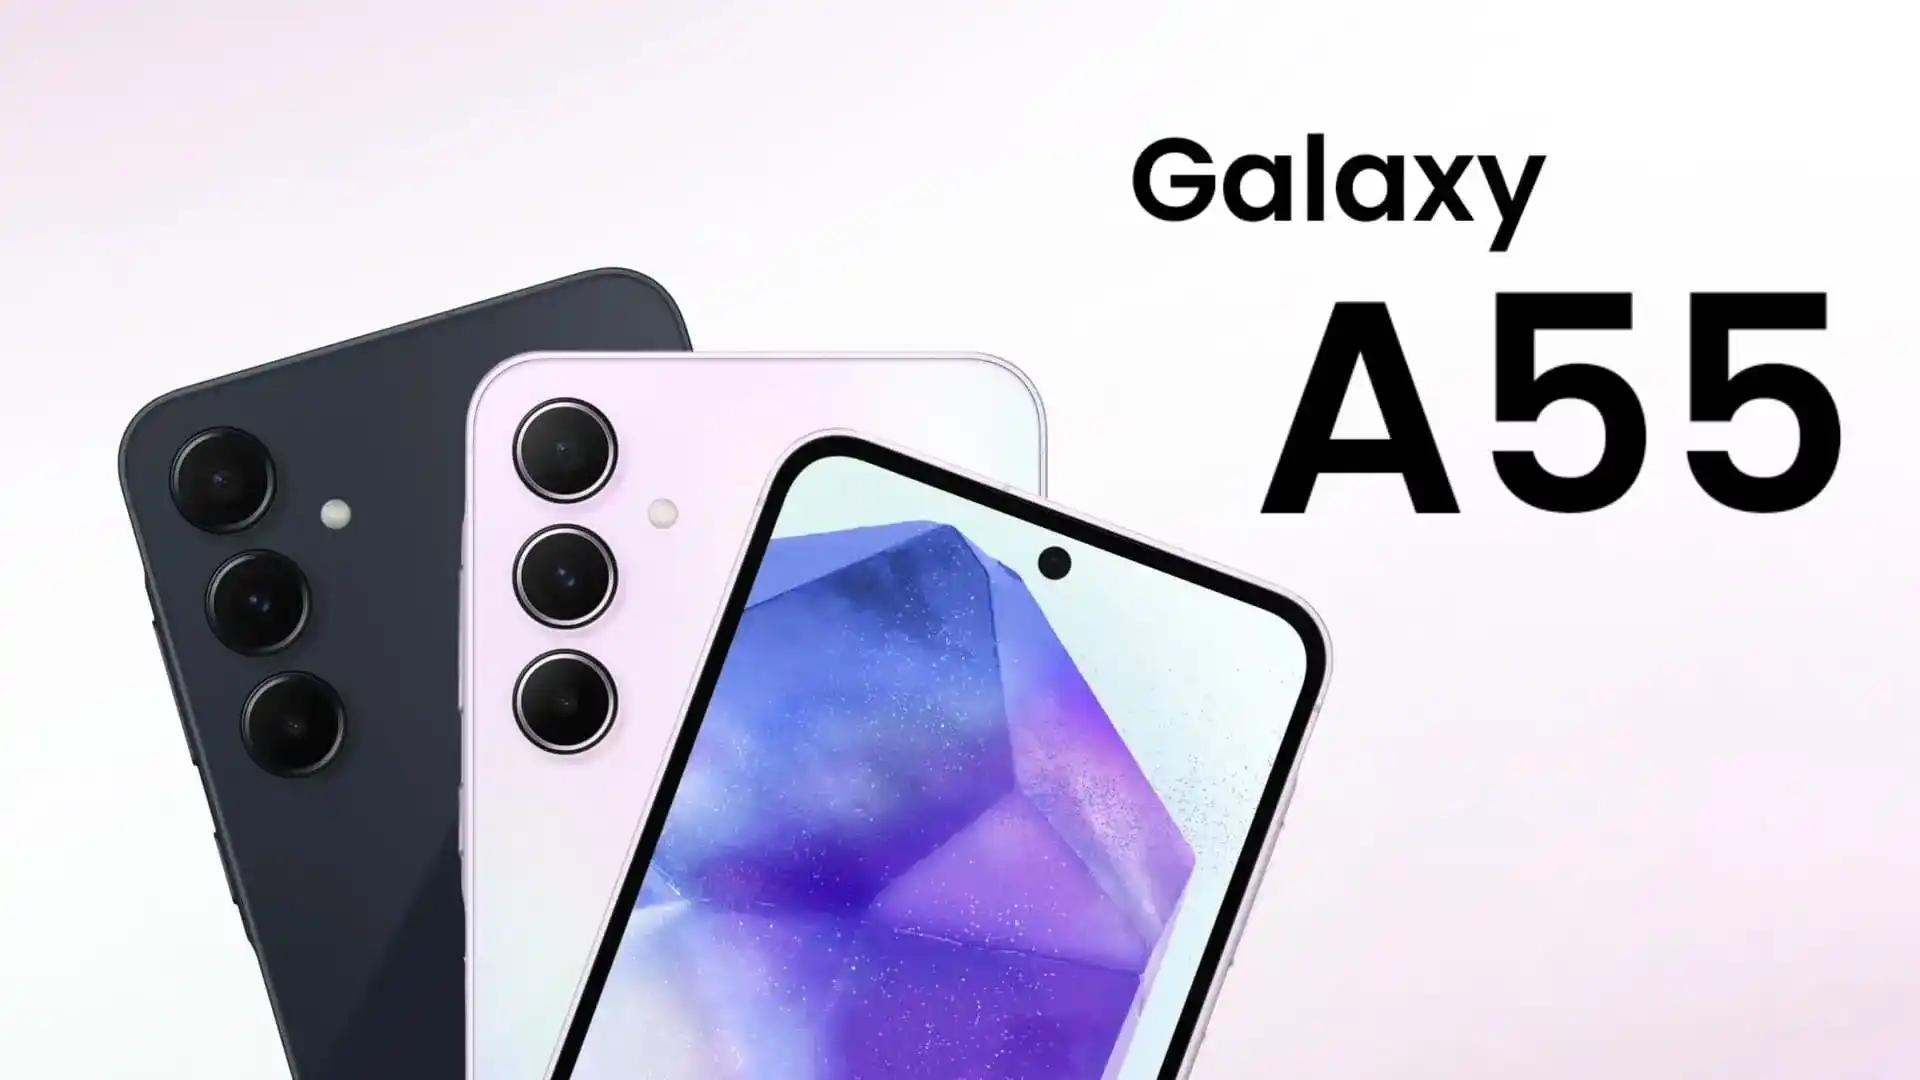 Samsung Galaxy A55 5g Leaked Official Renders And Processor Unveiled Mobile Clusters 9398